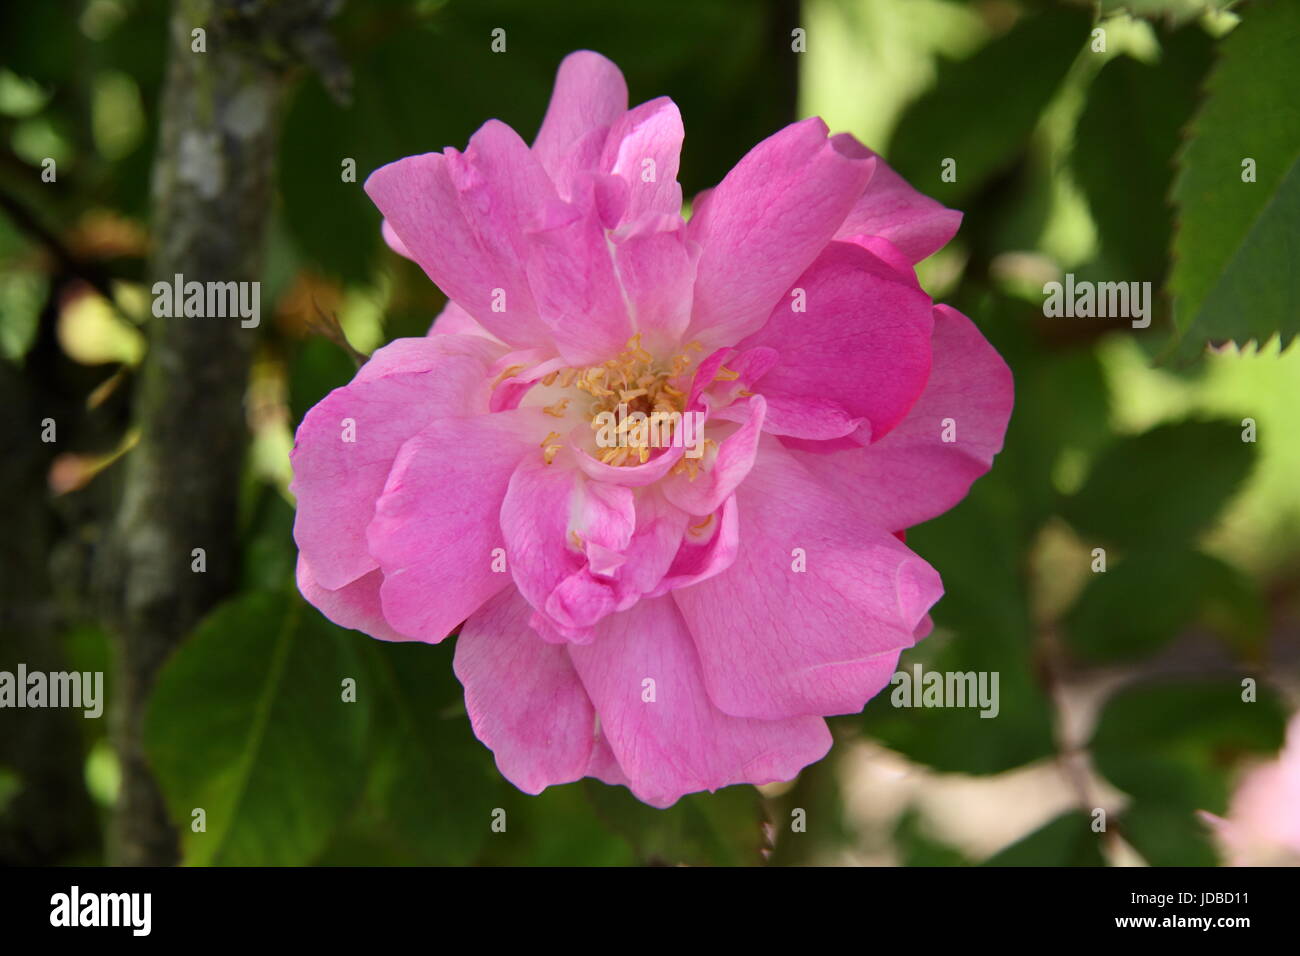 Rose labelled/marked as 'Rosa l'heritieranea' ('rambling rose') an old, boursault variety rose in full bloom, (June) - UK Stock Photo